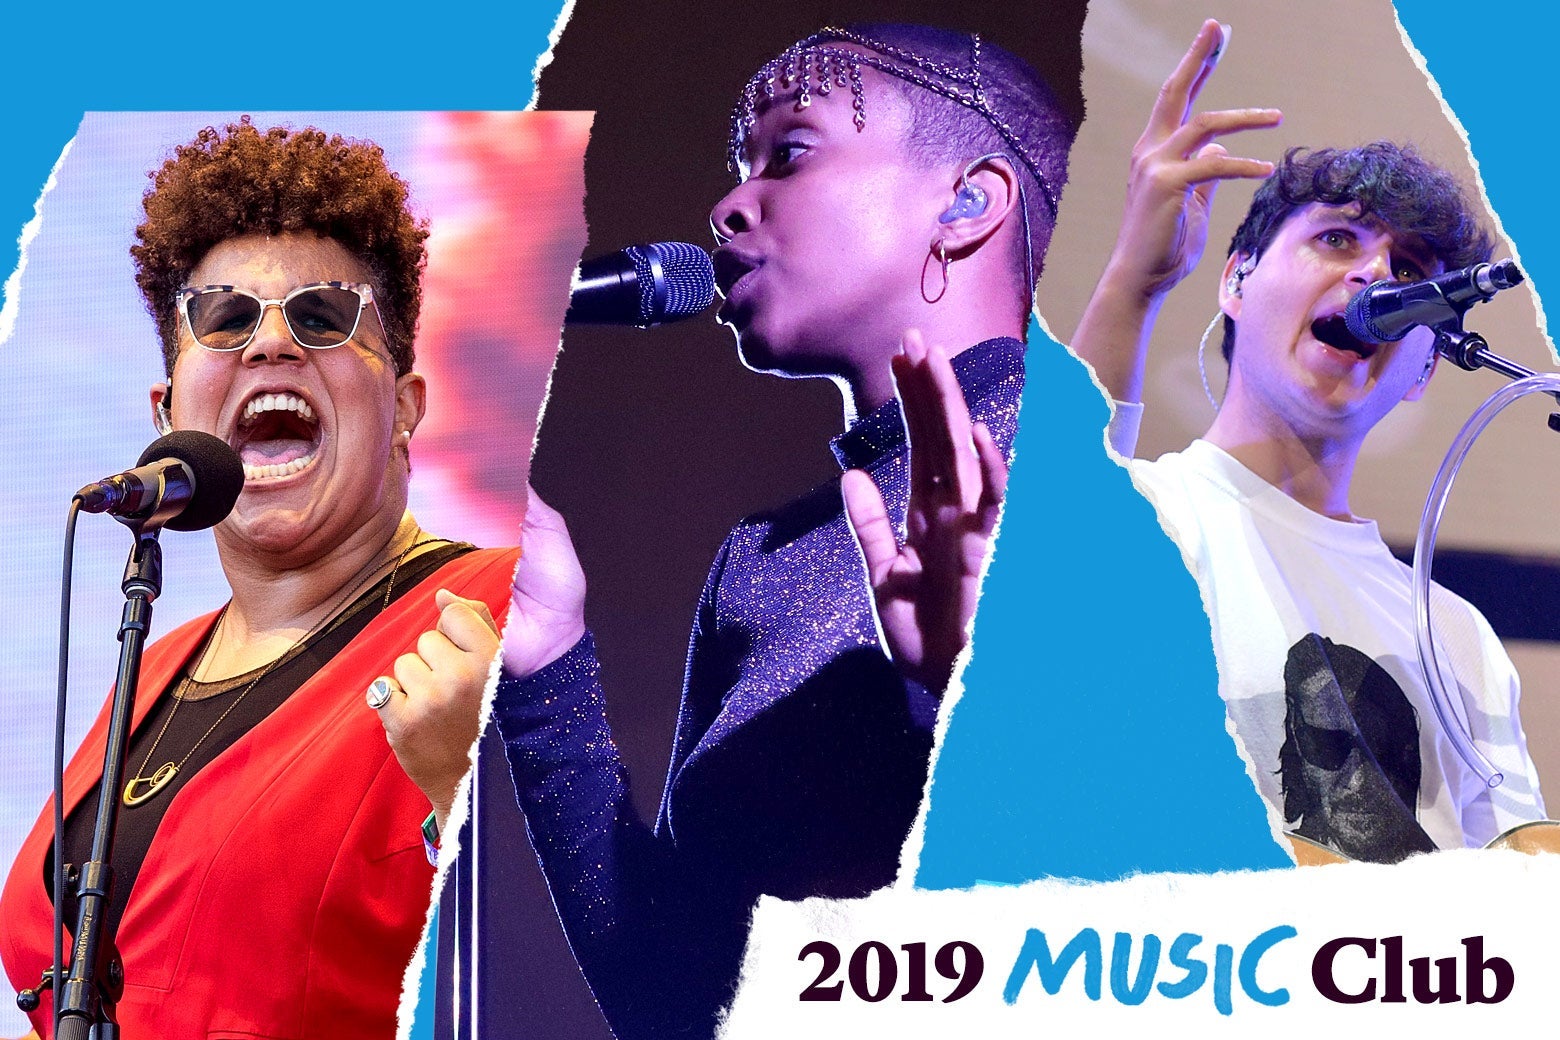 Brittany Howard, Jamila Woods, and Ezra Koenig with text in the corner that says, "2019 Music Club."